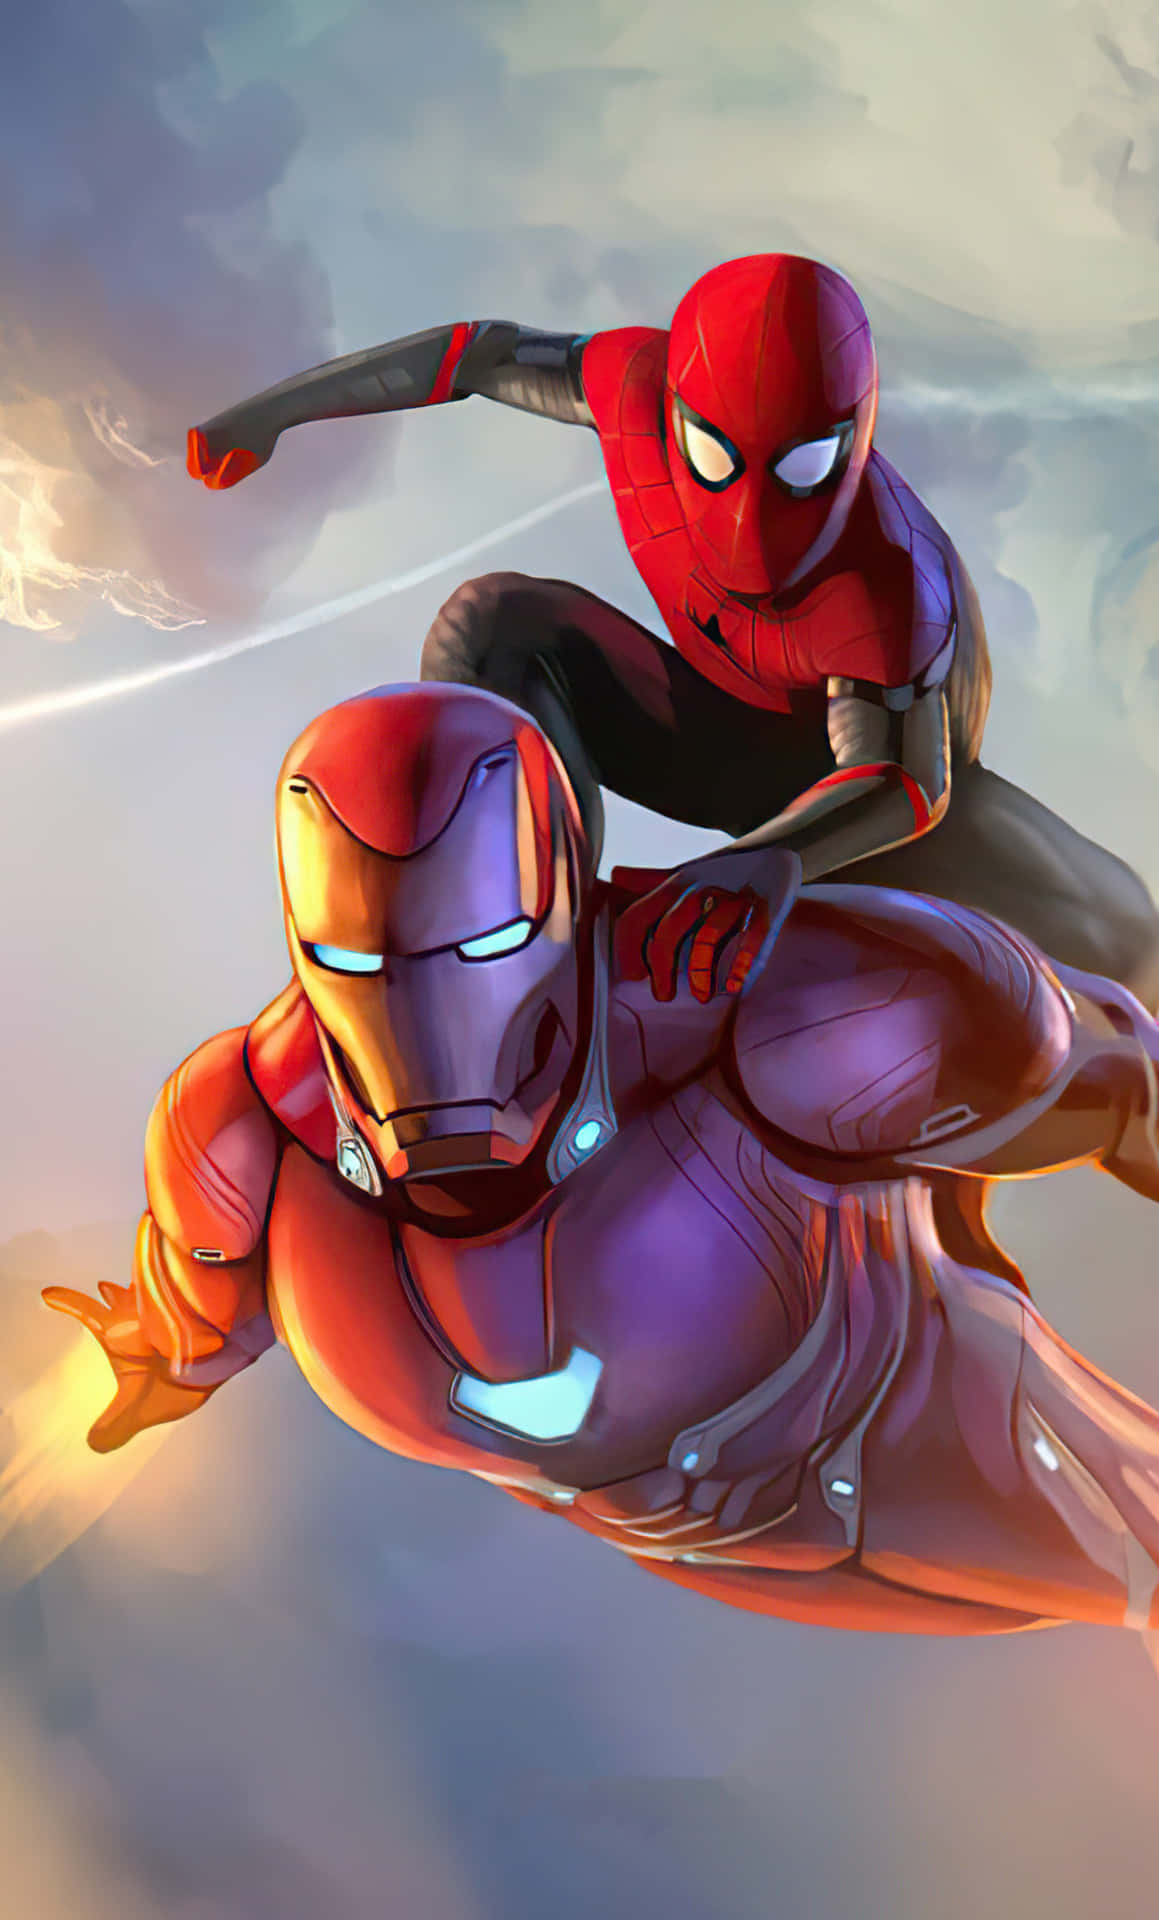 Spider Man and Iron Man team up to take justice on the streets Wallpaper